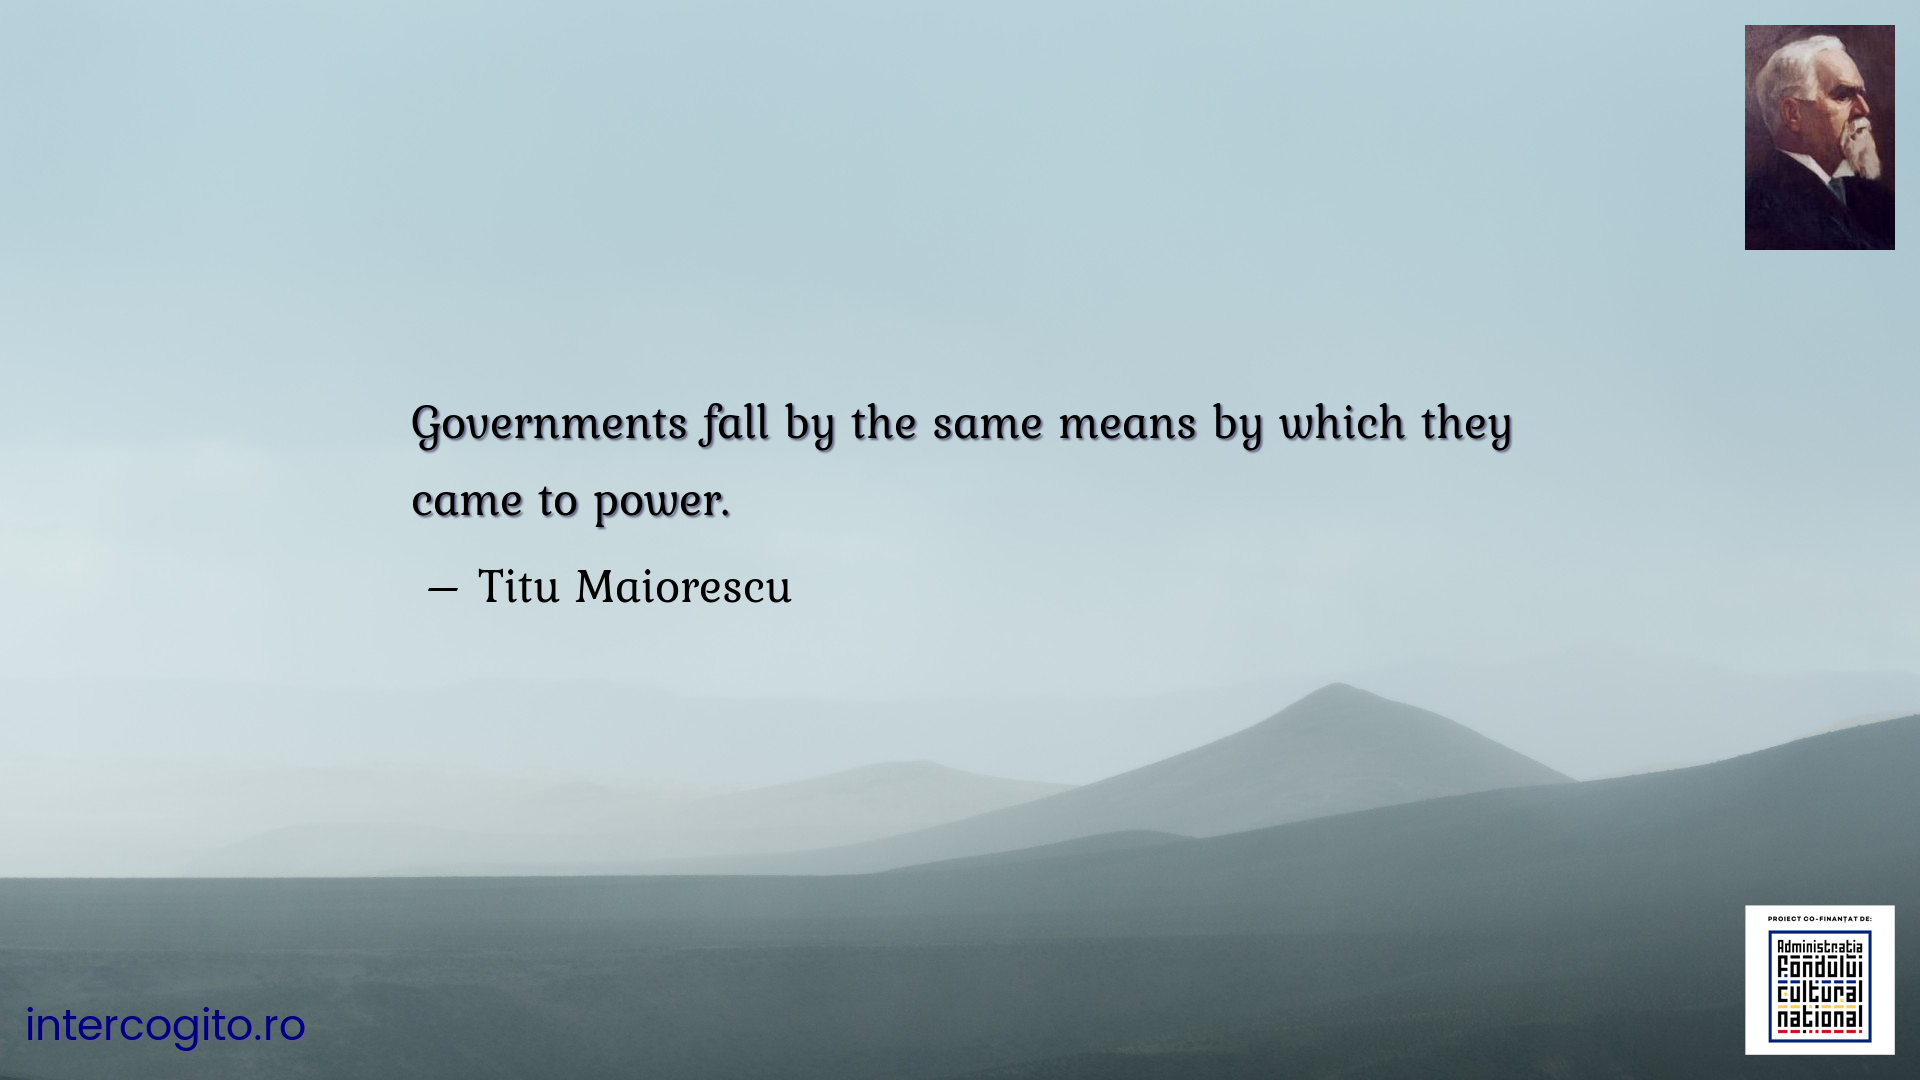 Governments fall by the same means by which they came to power.